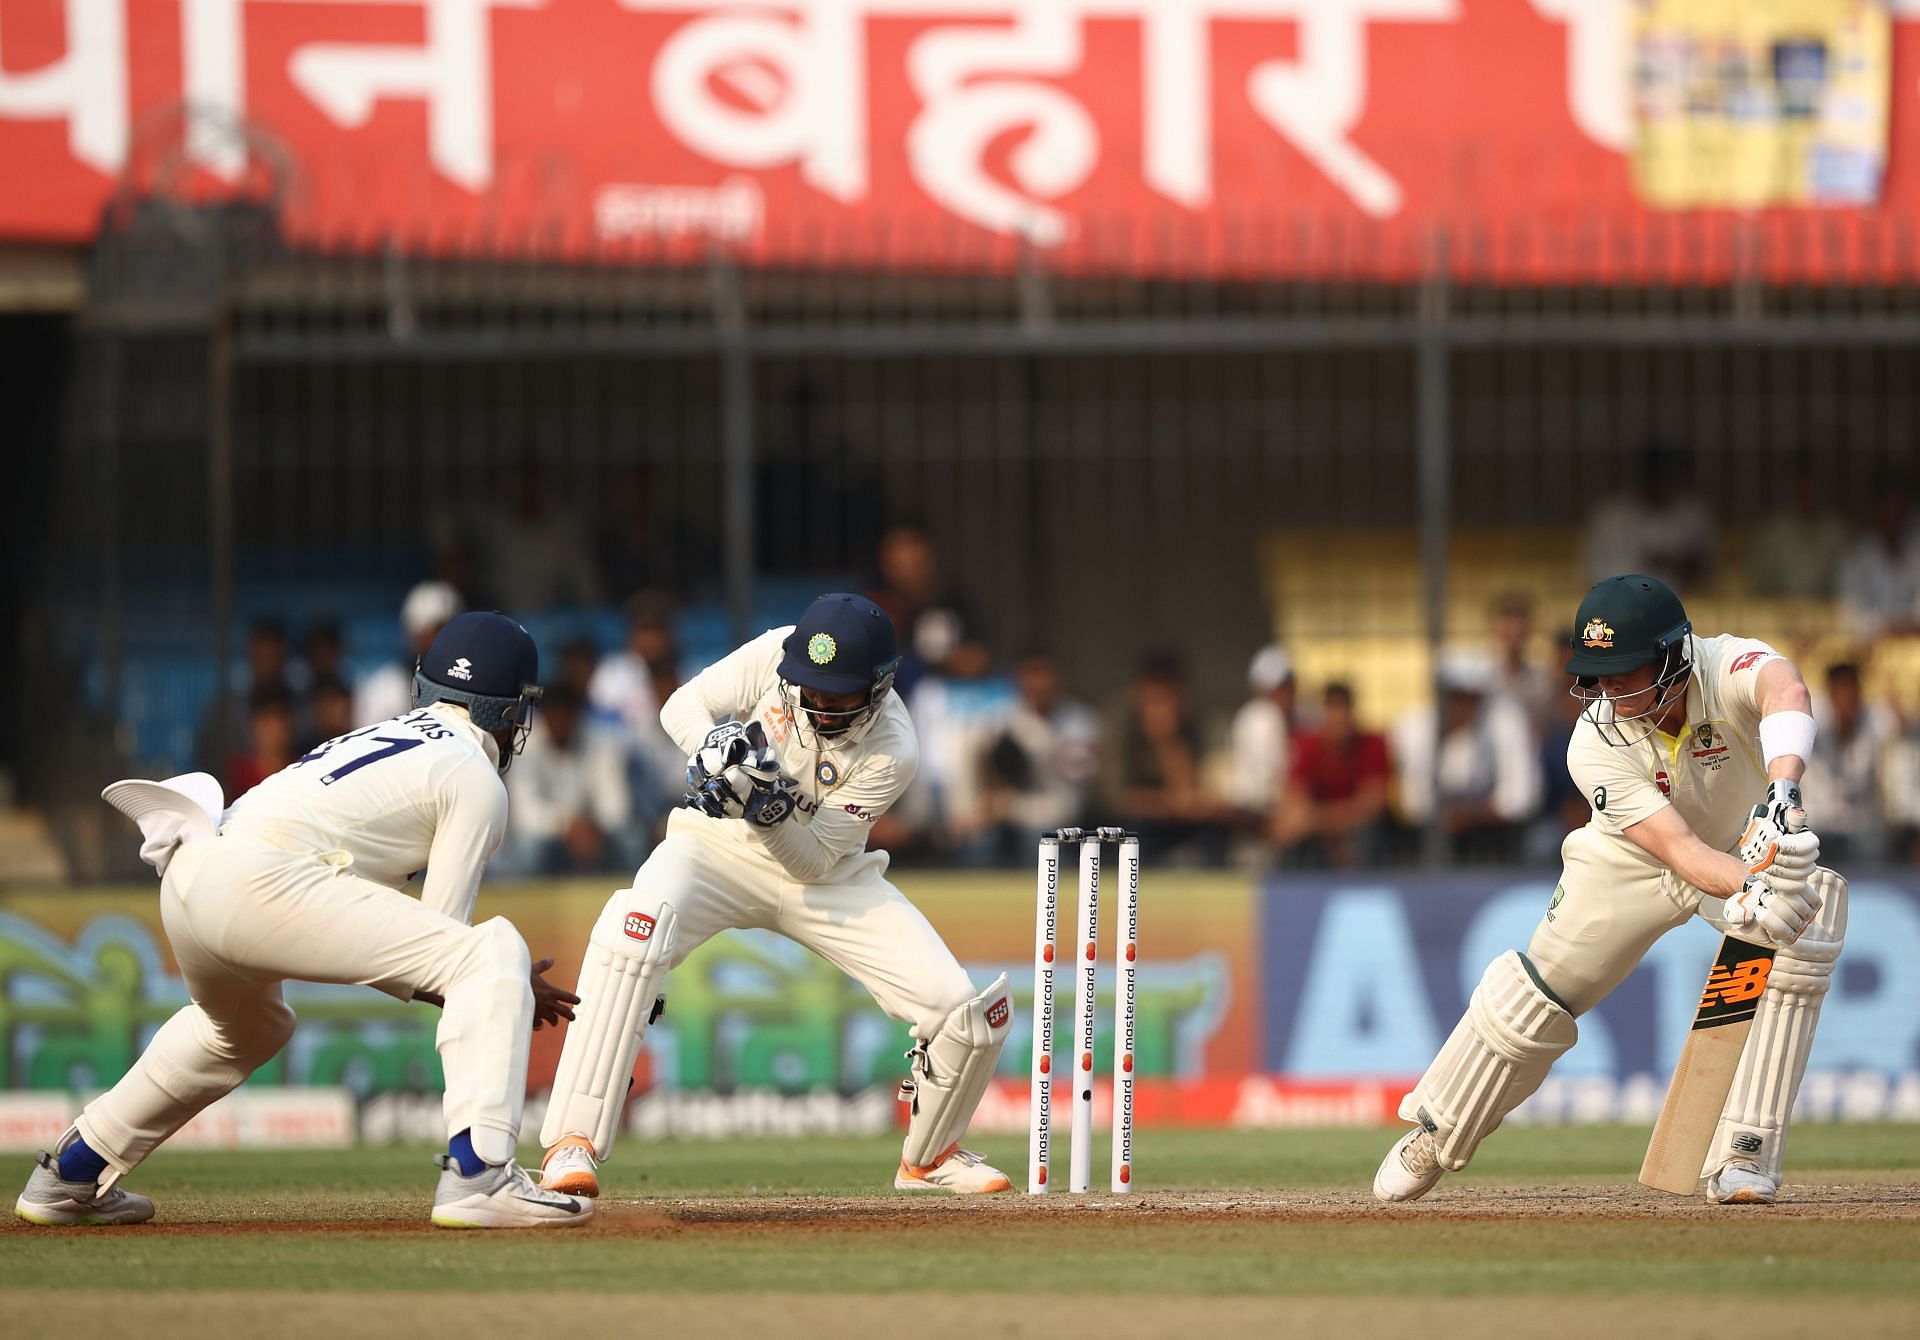 Steve Smith batting in Indore. (Credits: Getty)